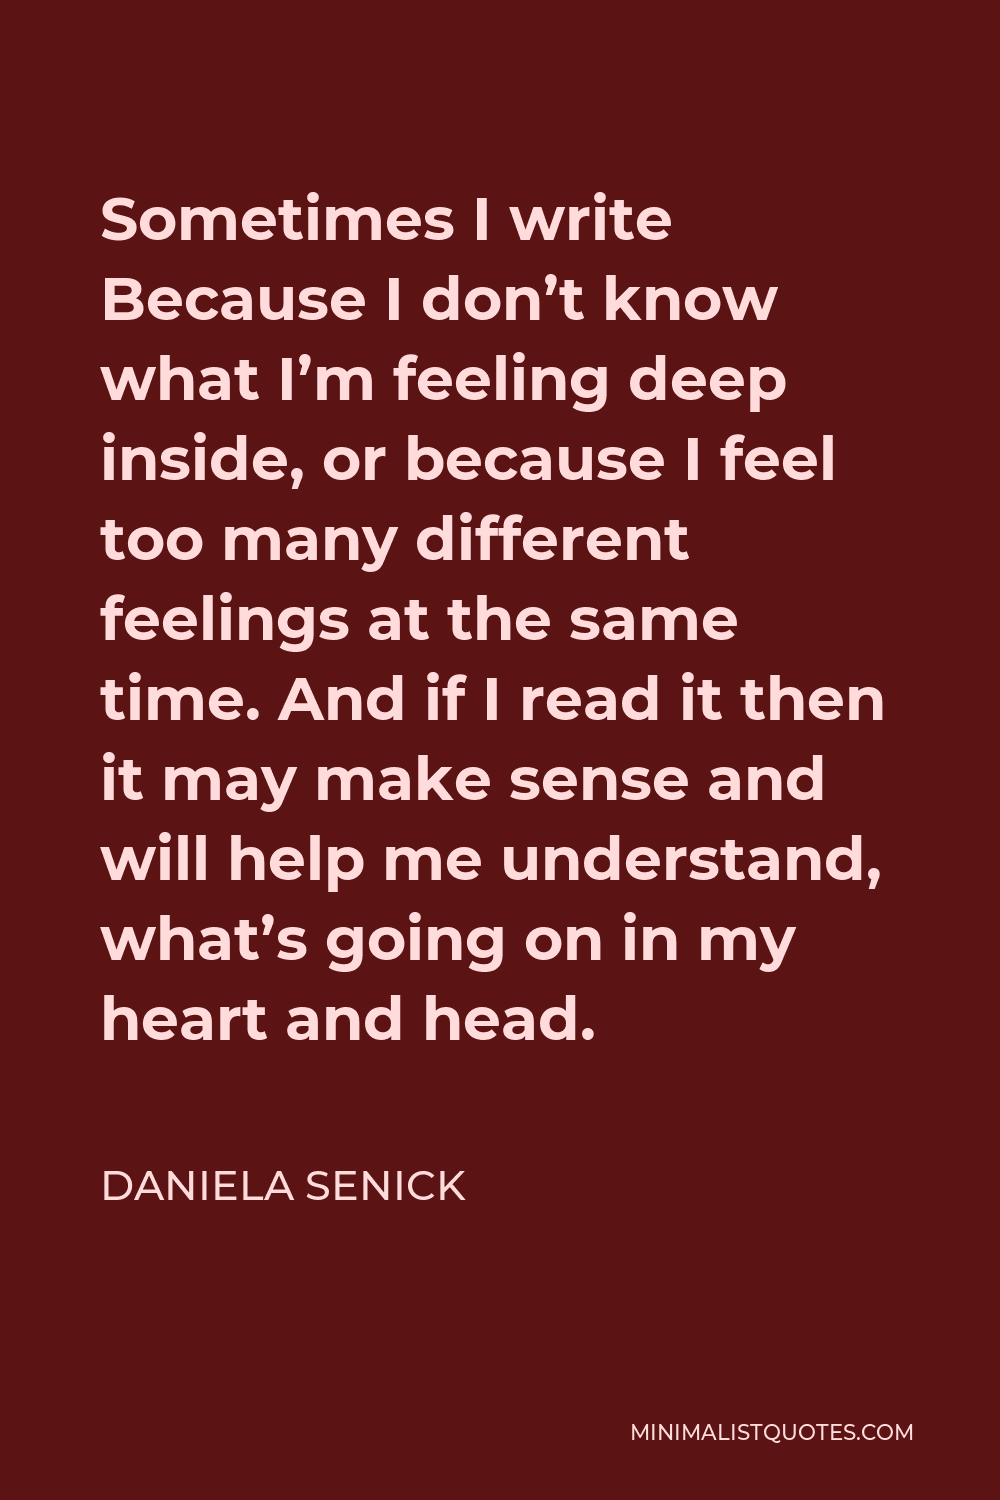 Daniela Senick Quote - Sometimes I write Because I don’t know what I’m feeling deep inside, or because I feel too many different feelings at the same time. And if I read it then it may make sense and will help me understand, what’s going on in my heart and head.